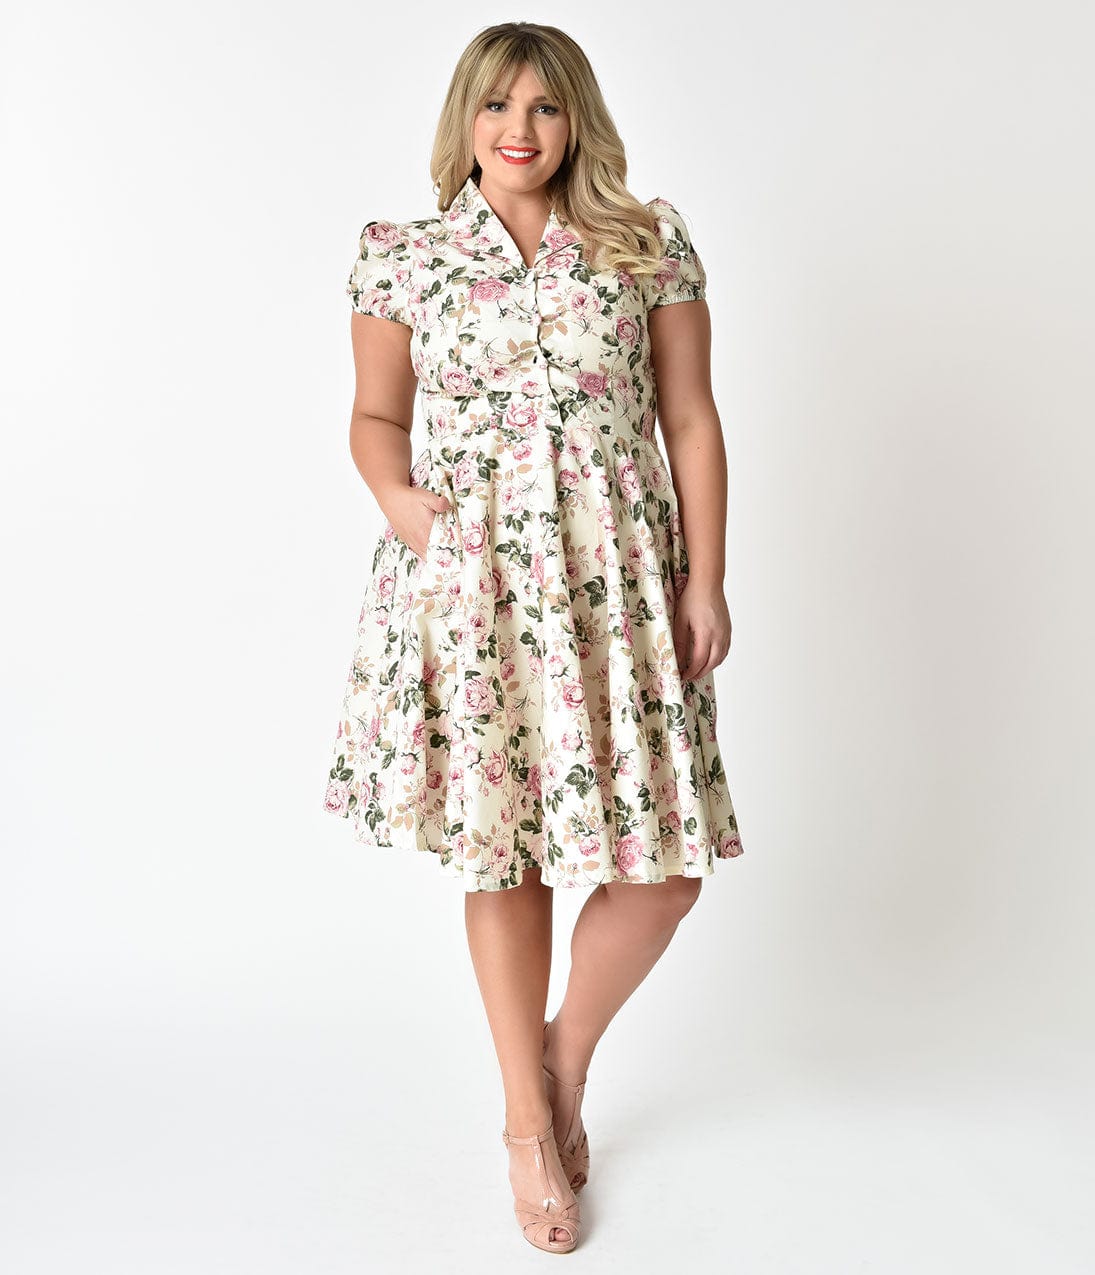 1940s Plus Size Fashion: Style Advice from 1940s to Today